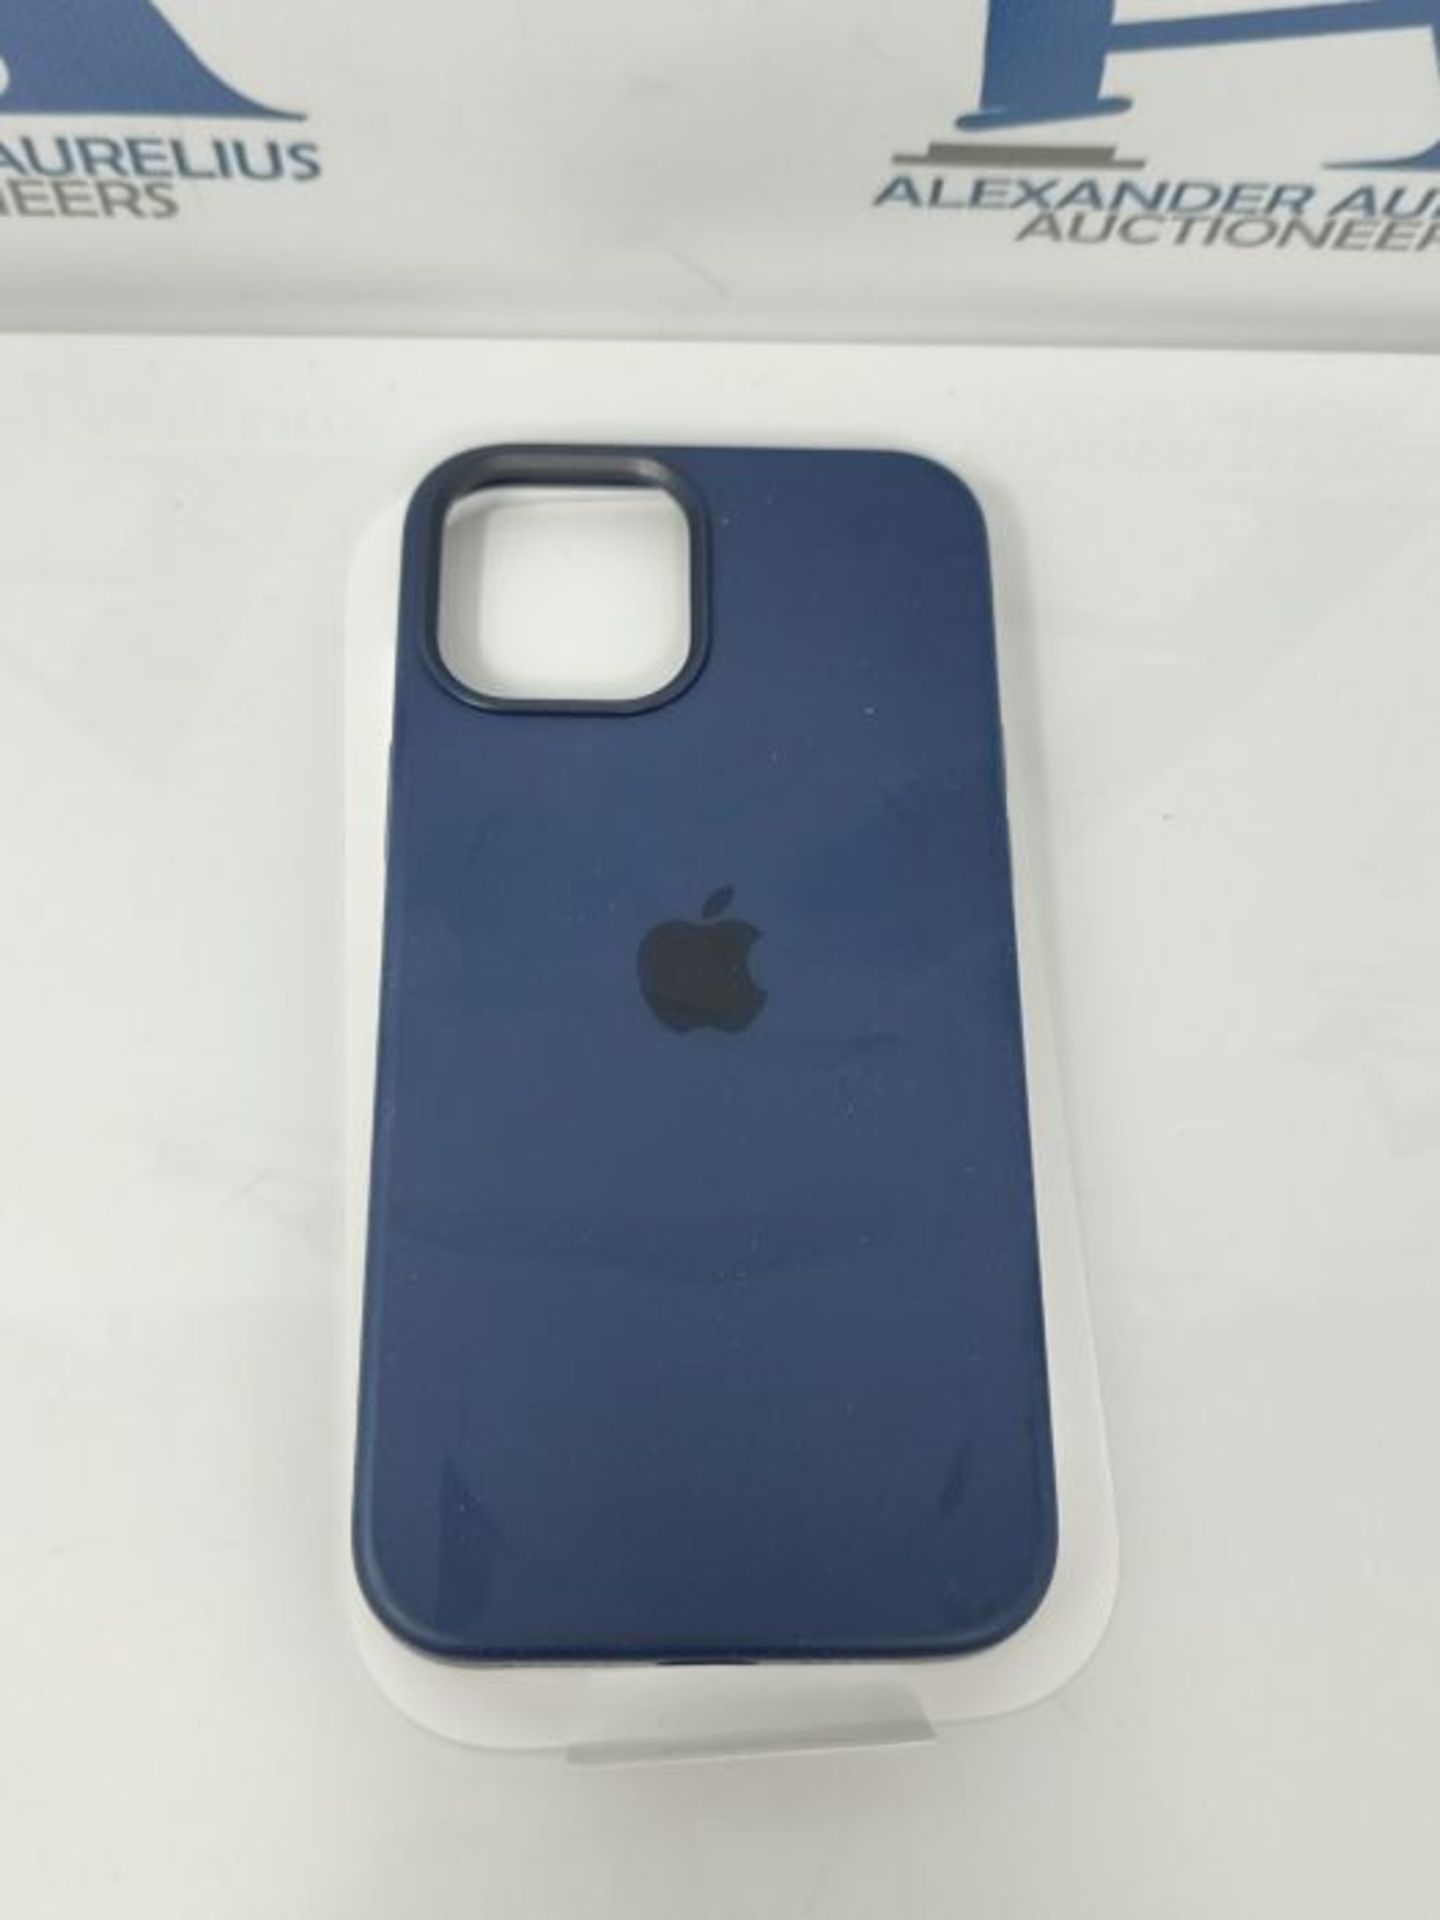 Apple Silicone Case with MagSafe (for iPhone 12 Pro Max) - Deep Navy - Image 3 of 3